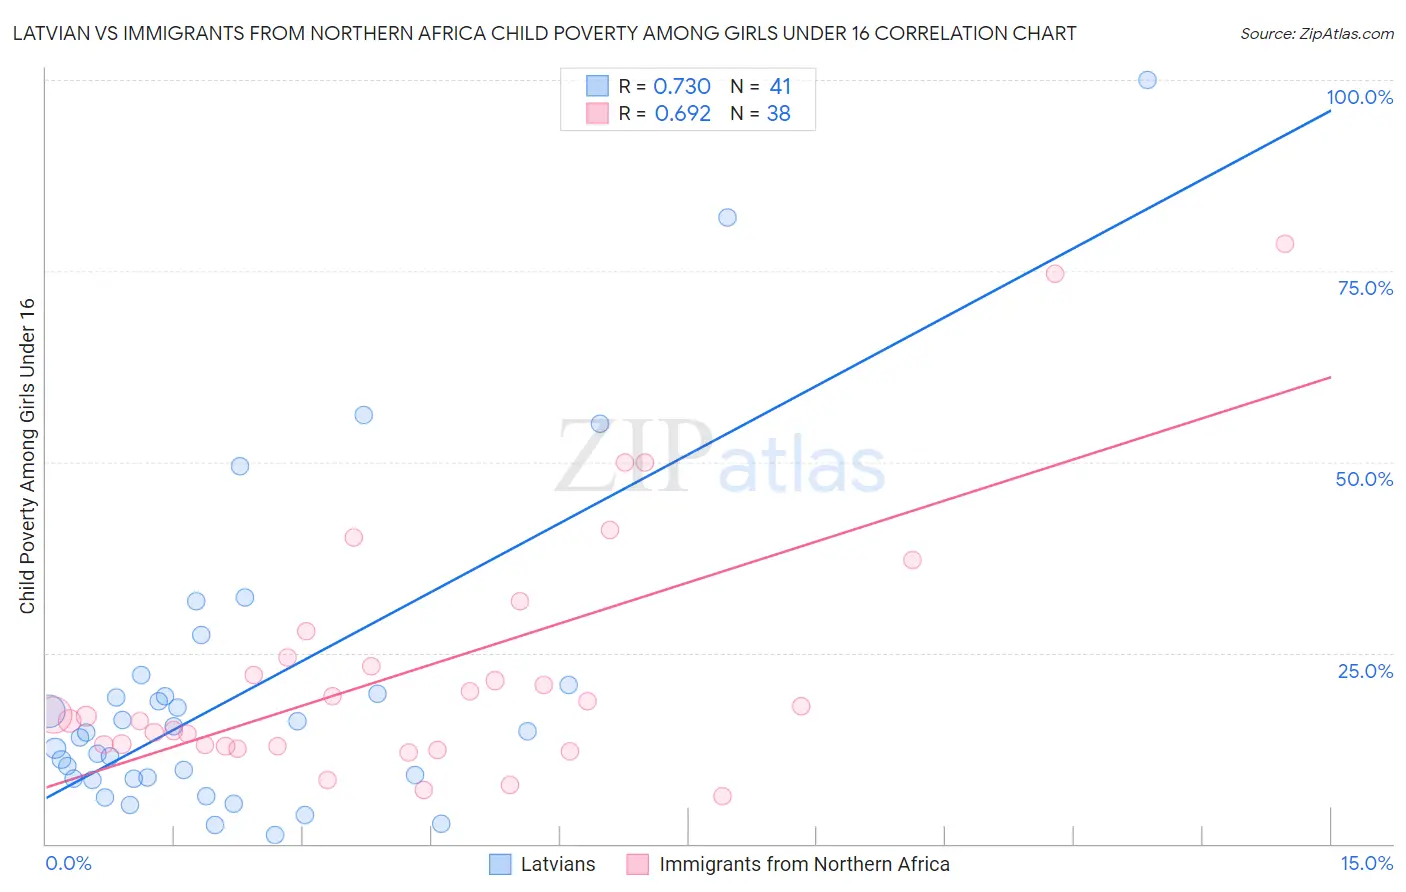 Latvian vs Immigrants from Northern Africa Child Poverty Among Girls Under 16